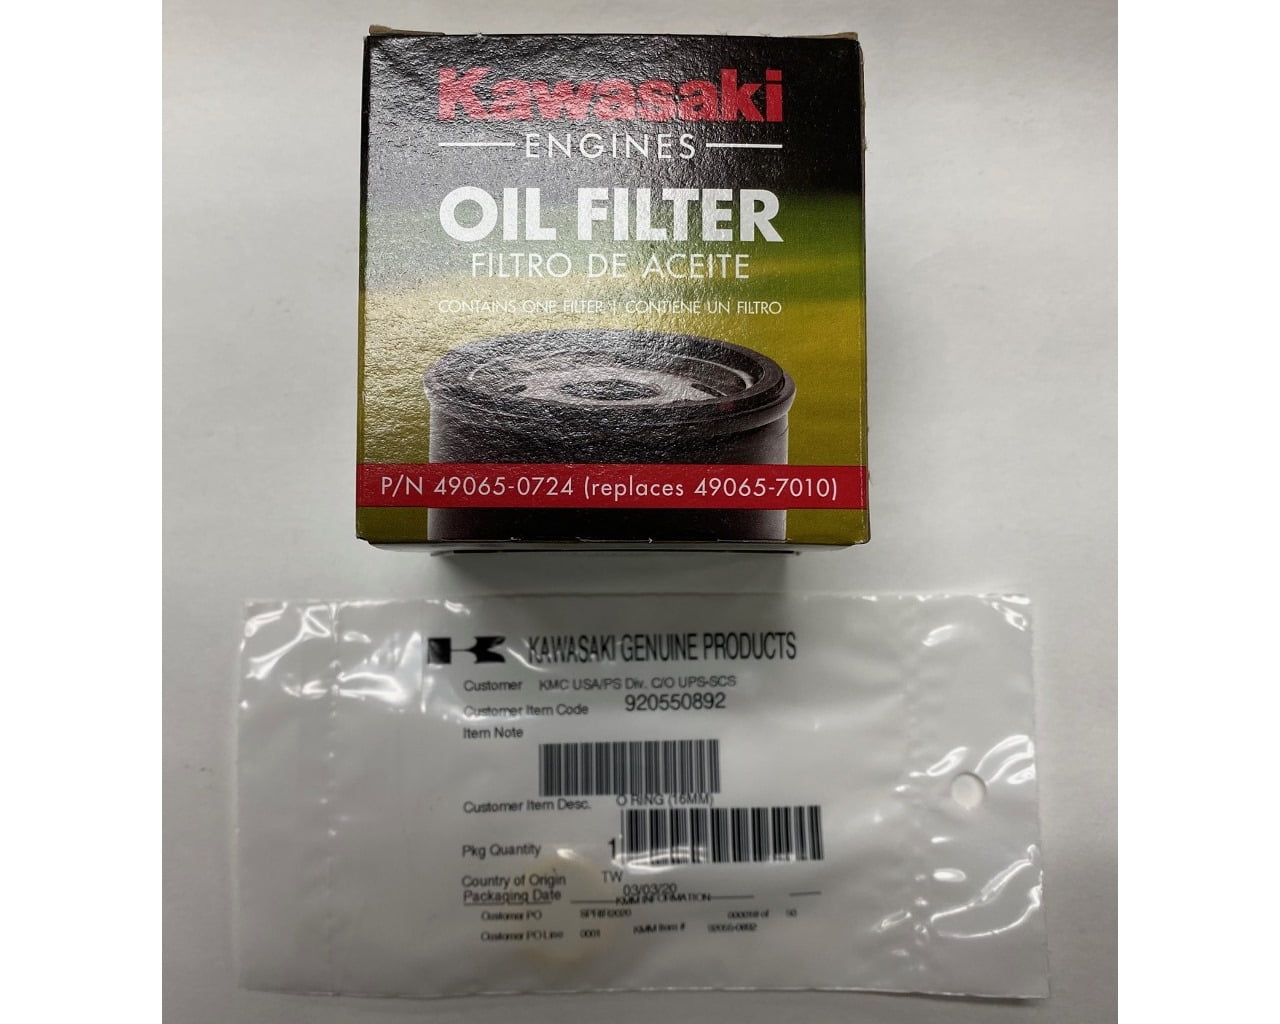 Laser 93100 Oil Filter Replaces Briggs 692513 70185 KAW 49065-7007 49065-7010 for sale online